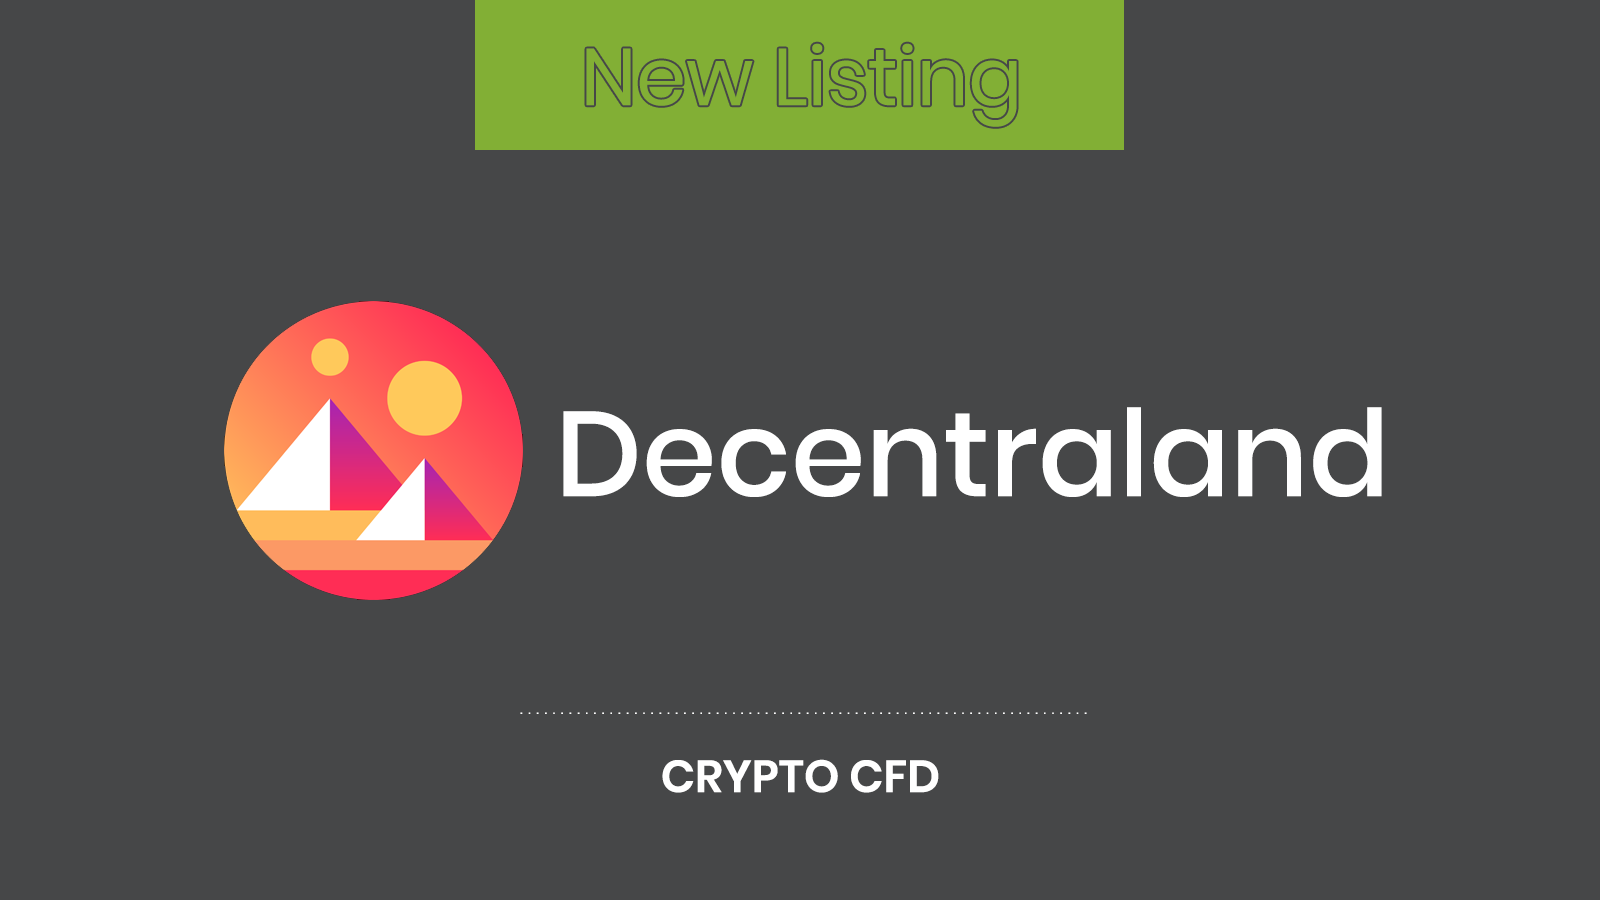 New Listing: Decentraland (MANA) Crypto CFD is now available to trade on ThinkMarkets